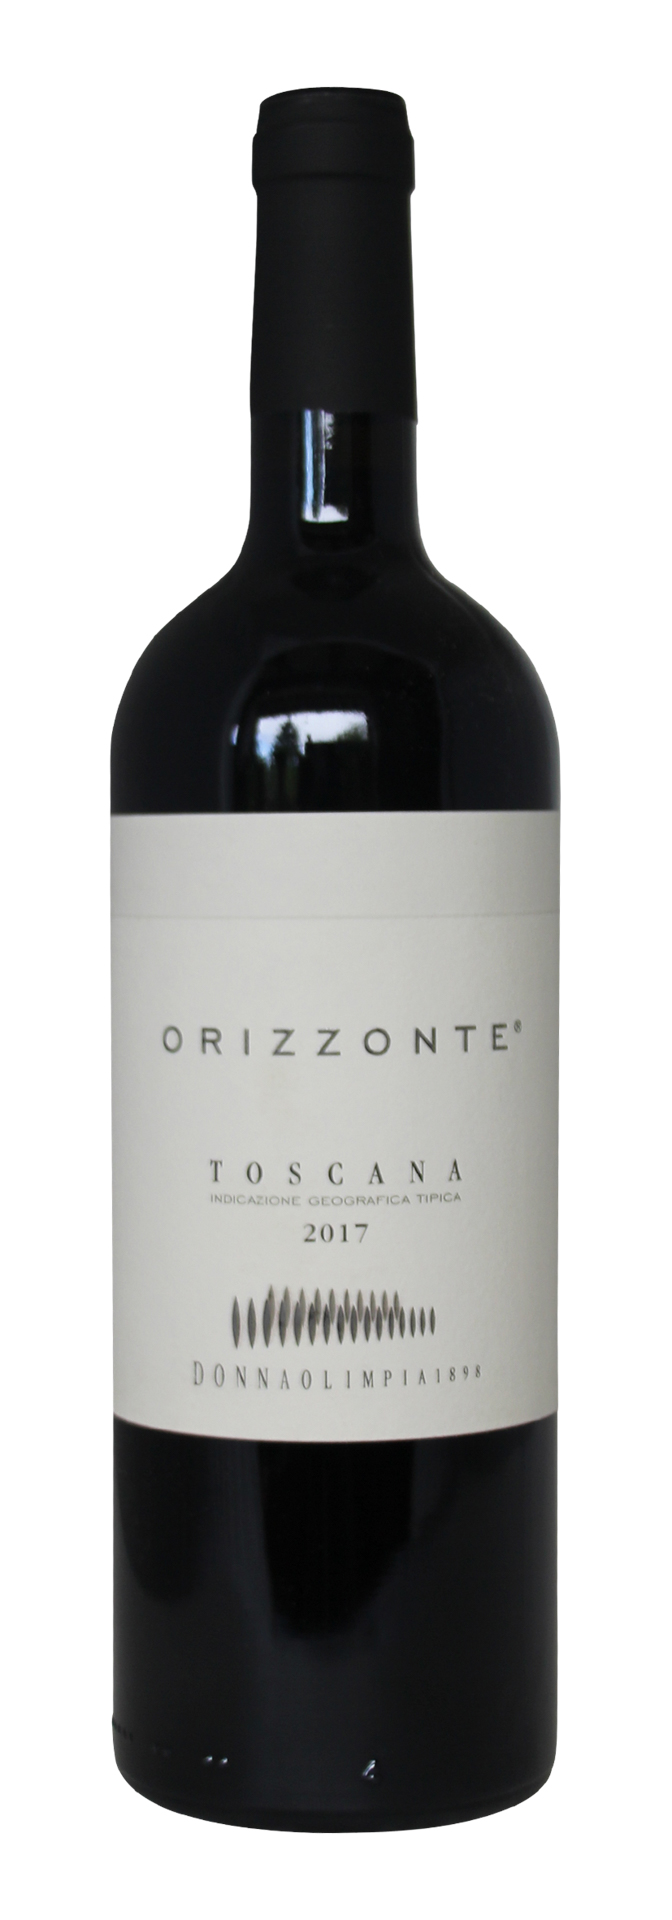 Toscana IGT Orizzonte 2017